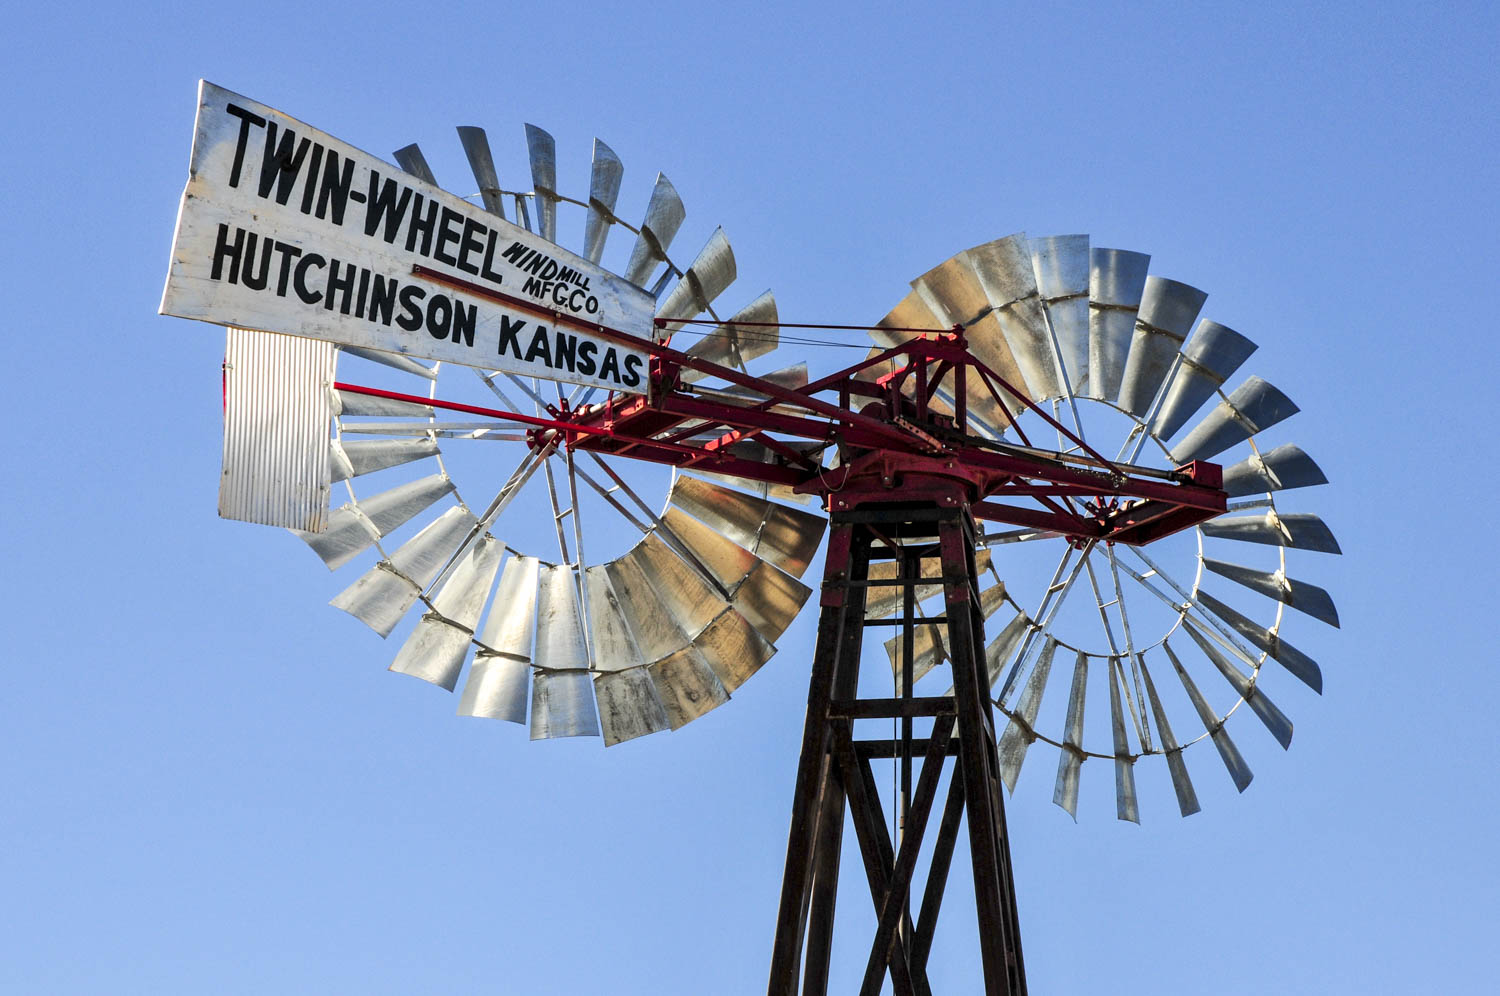 USA: Texas, Lubbock, Southern High Plains, American Wind Power Center and Windmill Museum, twin-wheel windmill for Huchinson Kansas, silhouetted against the sun